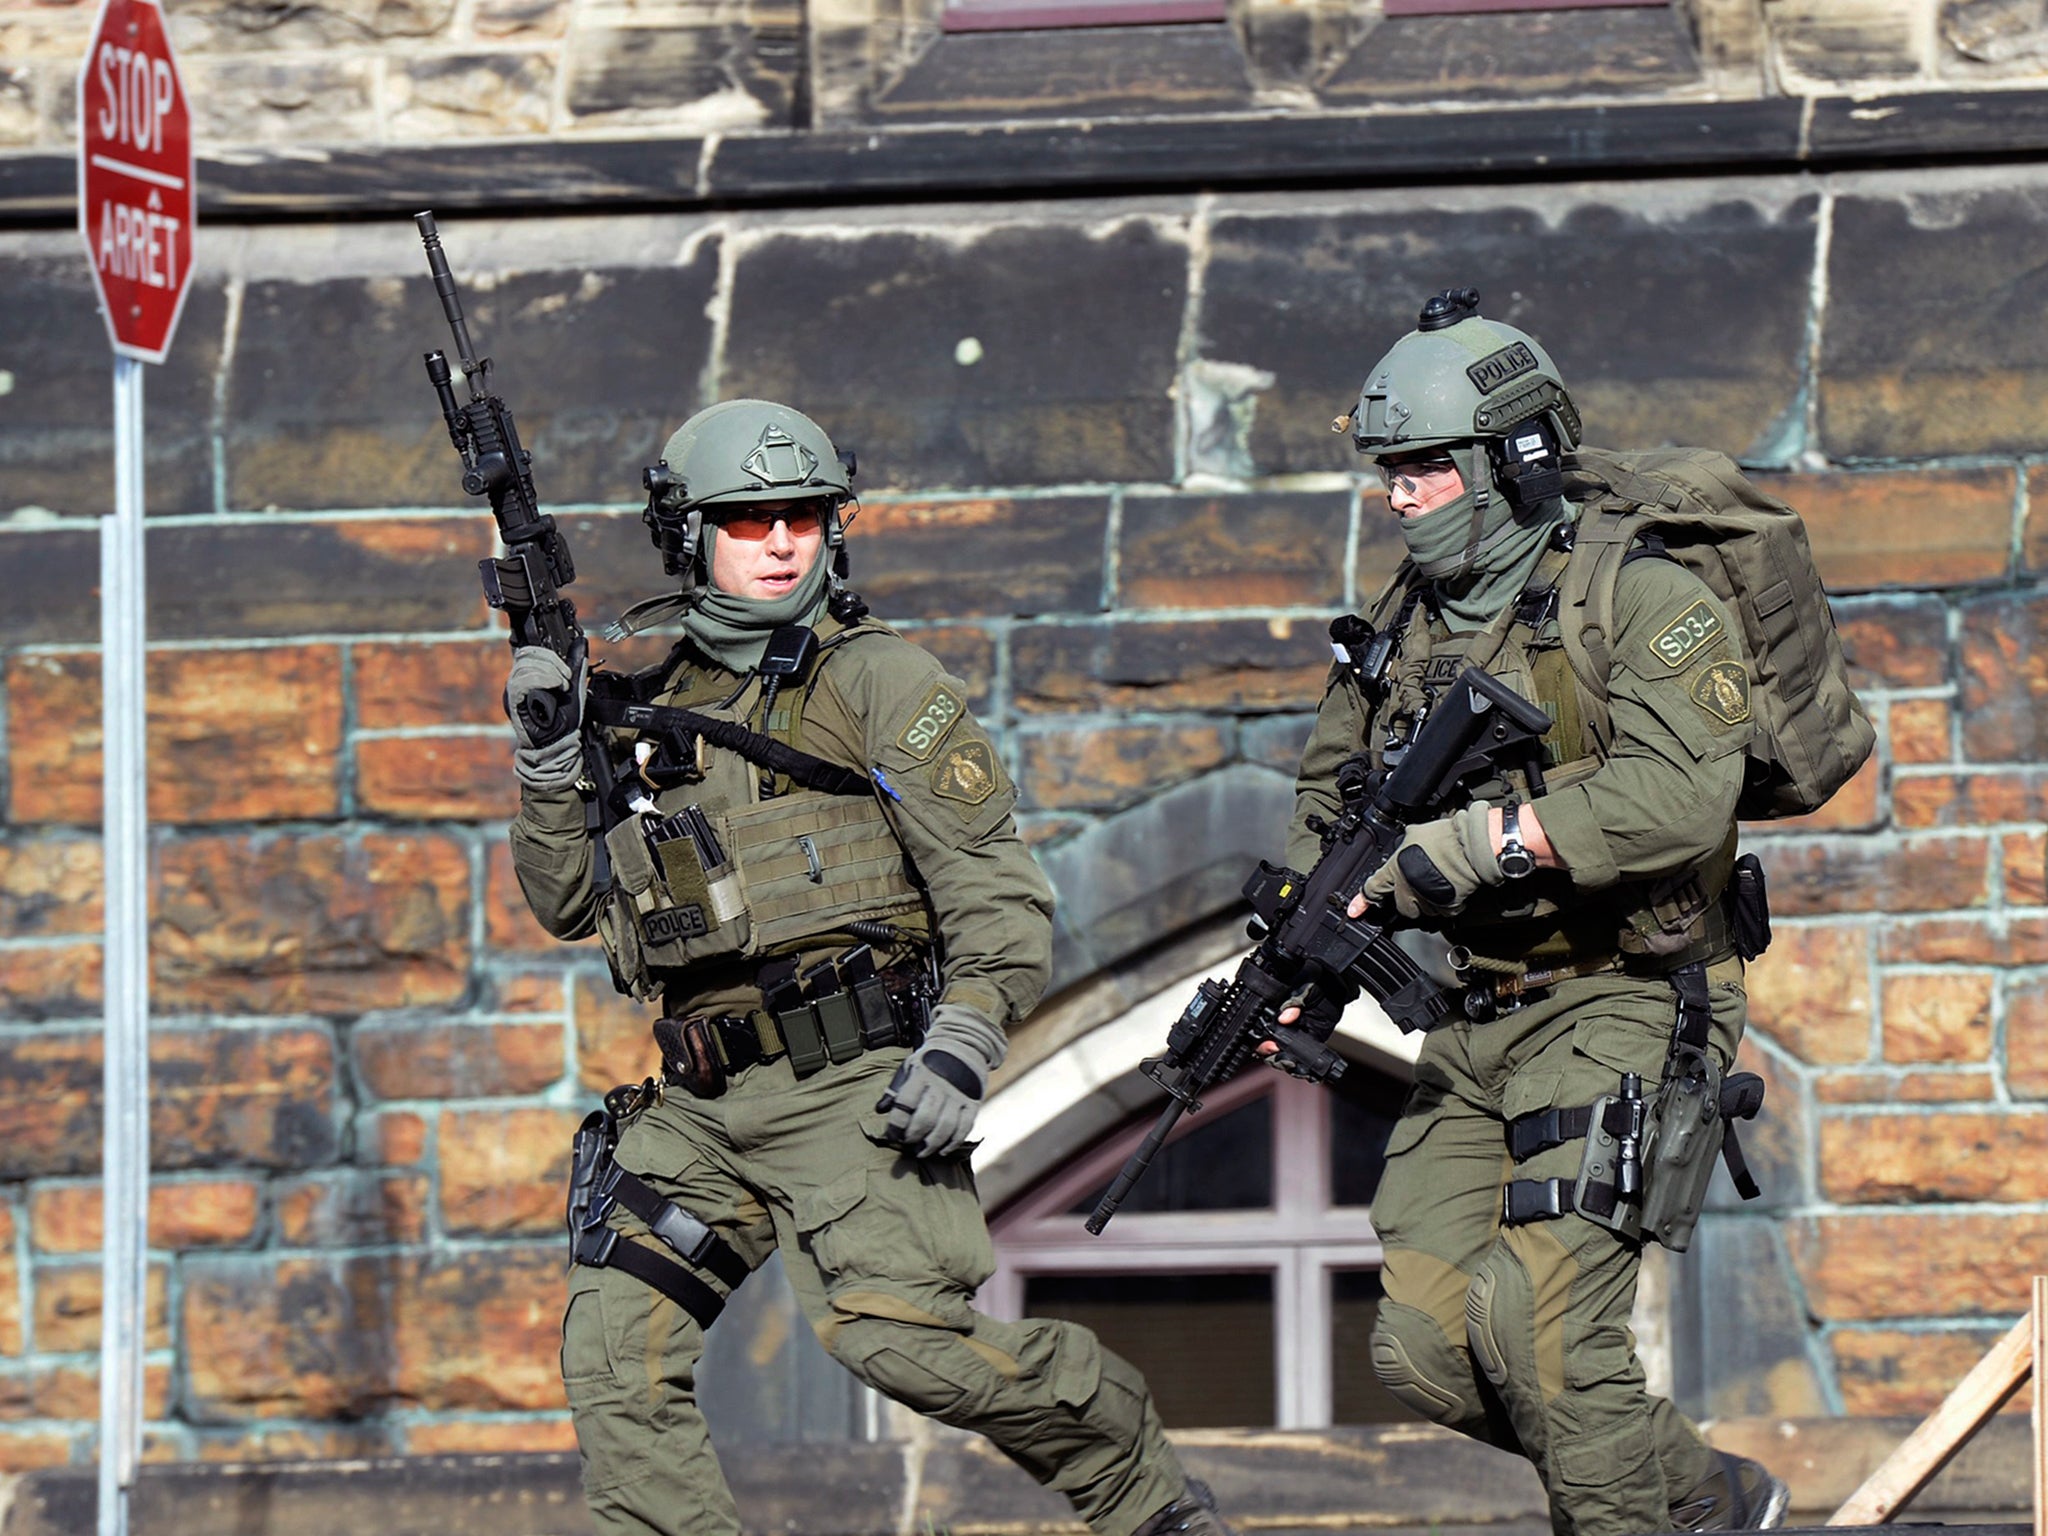 A Royal Canadian Mounted Police intervention team responds to a reported shooting at Parliament building in Ottawa